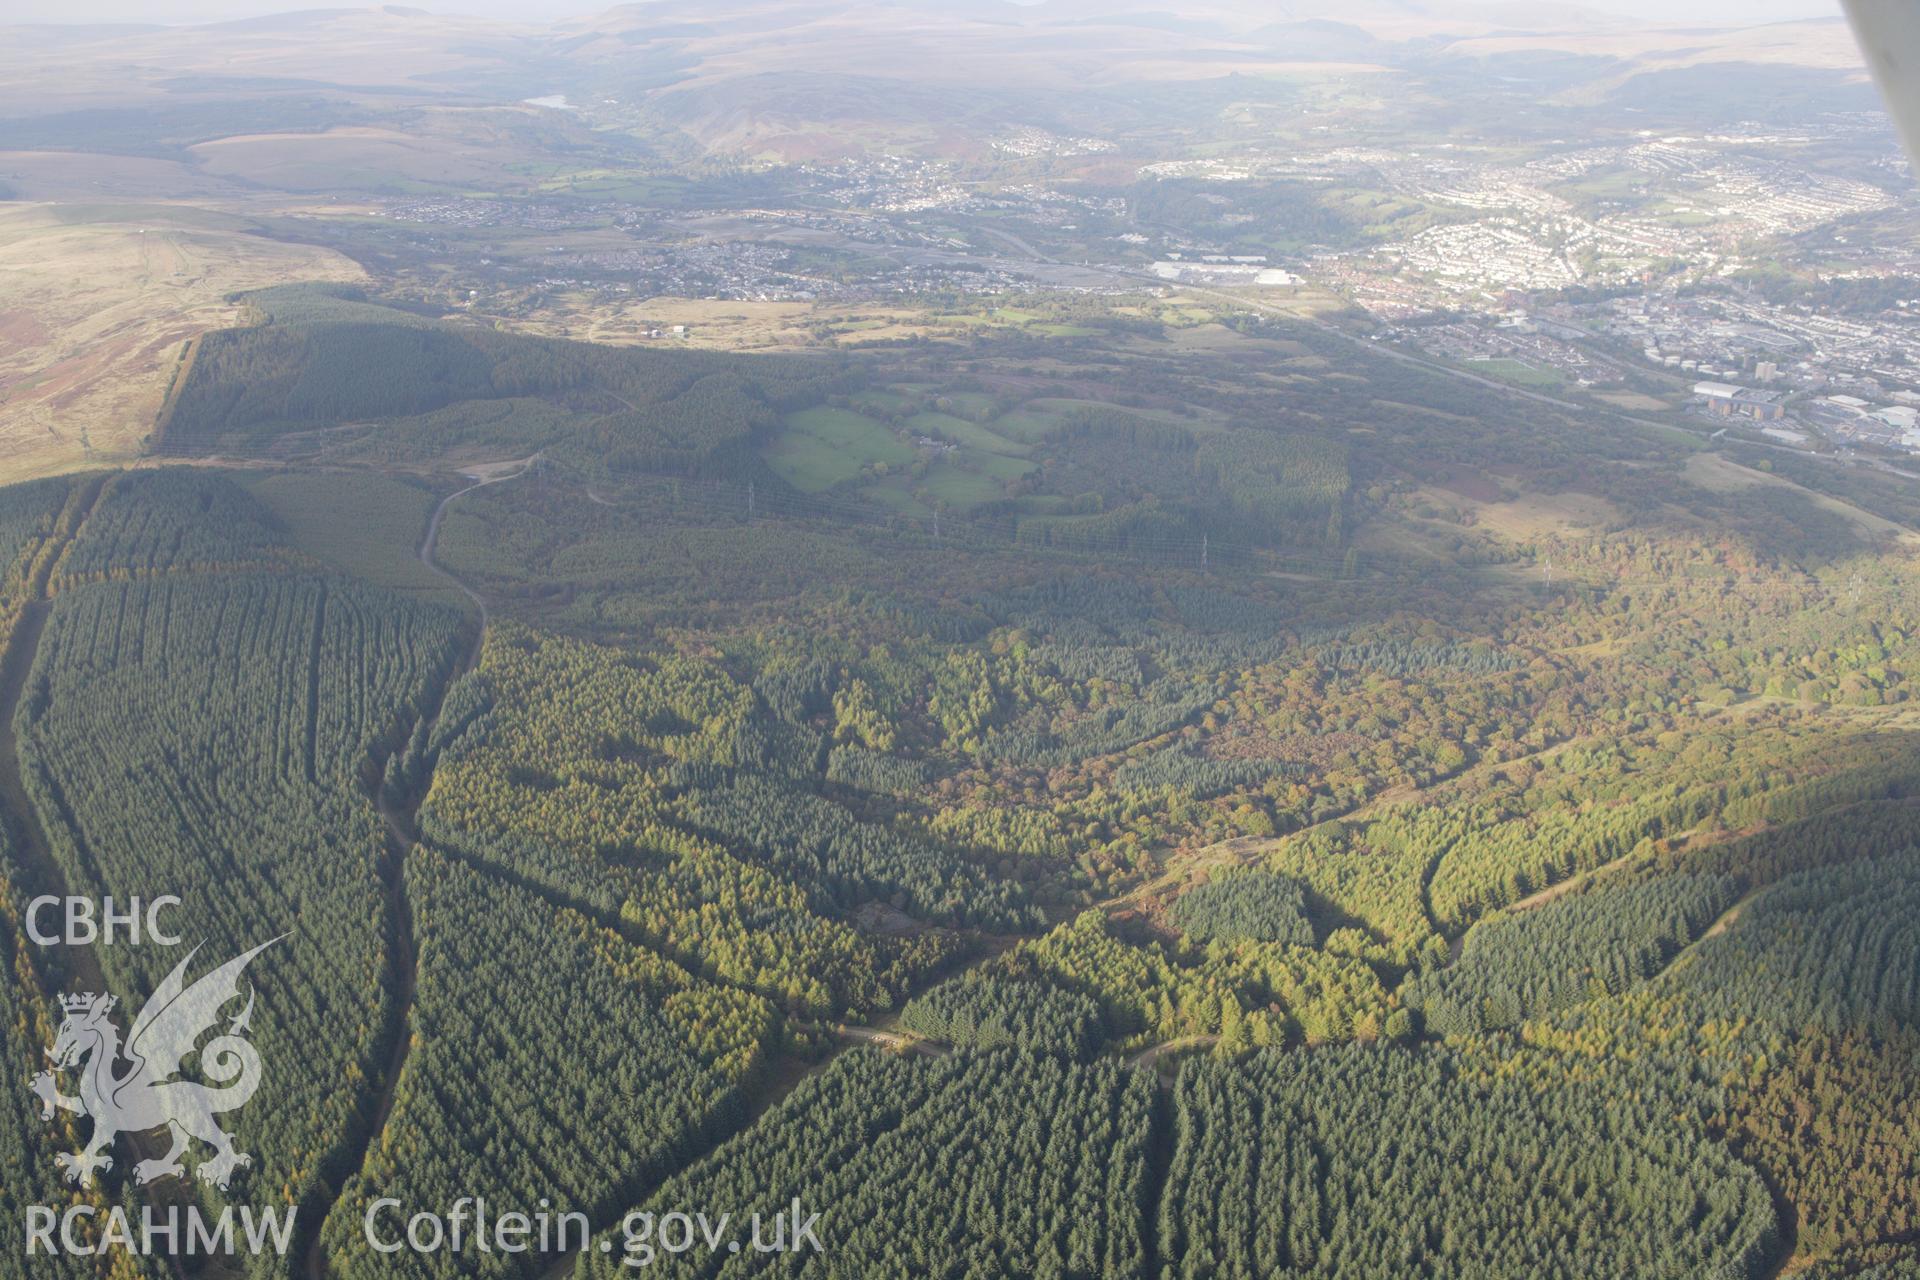 RCAHMW colour oblique aerial photograph of forestry north-east of Aberdare with Cwm Pit Colliery at Abercanaid visible in the distance. Taken on 14 October 2009 by Toby Driver